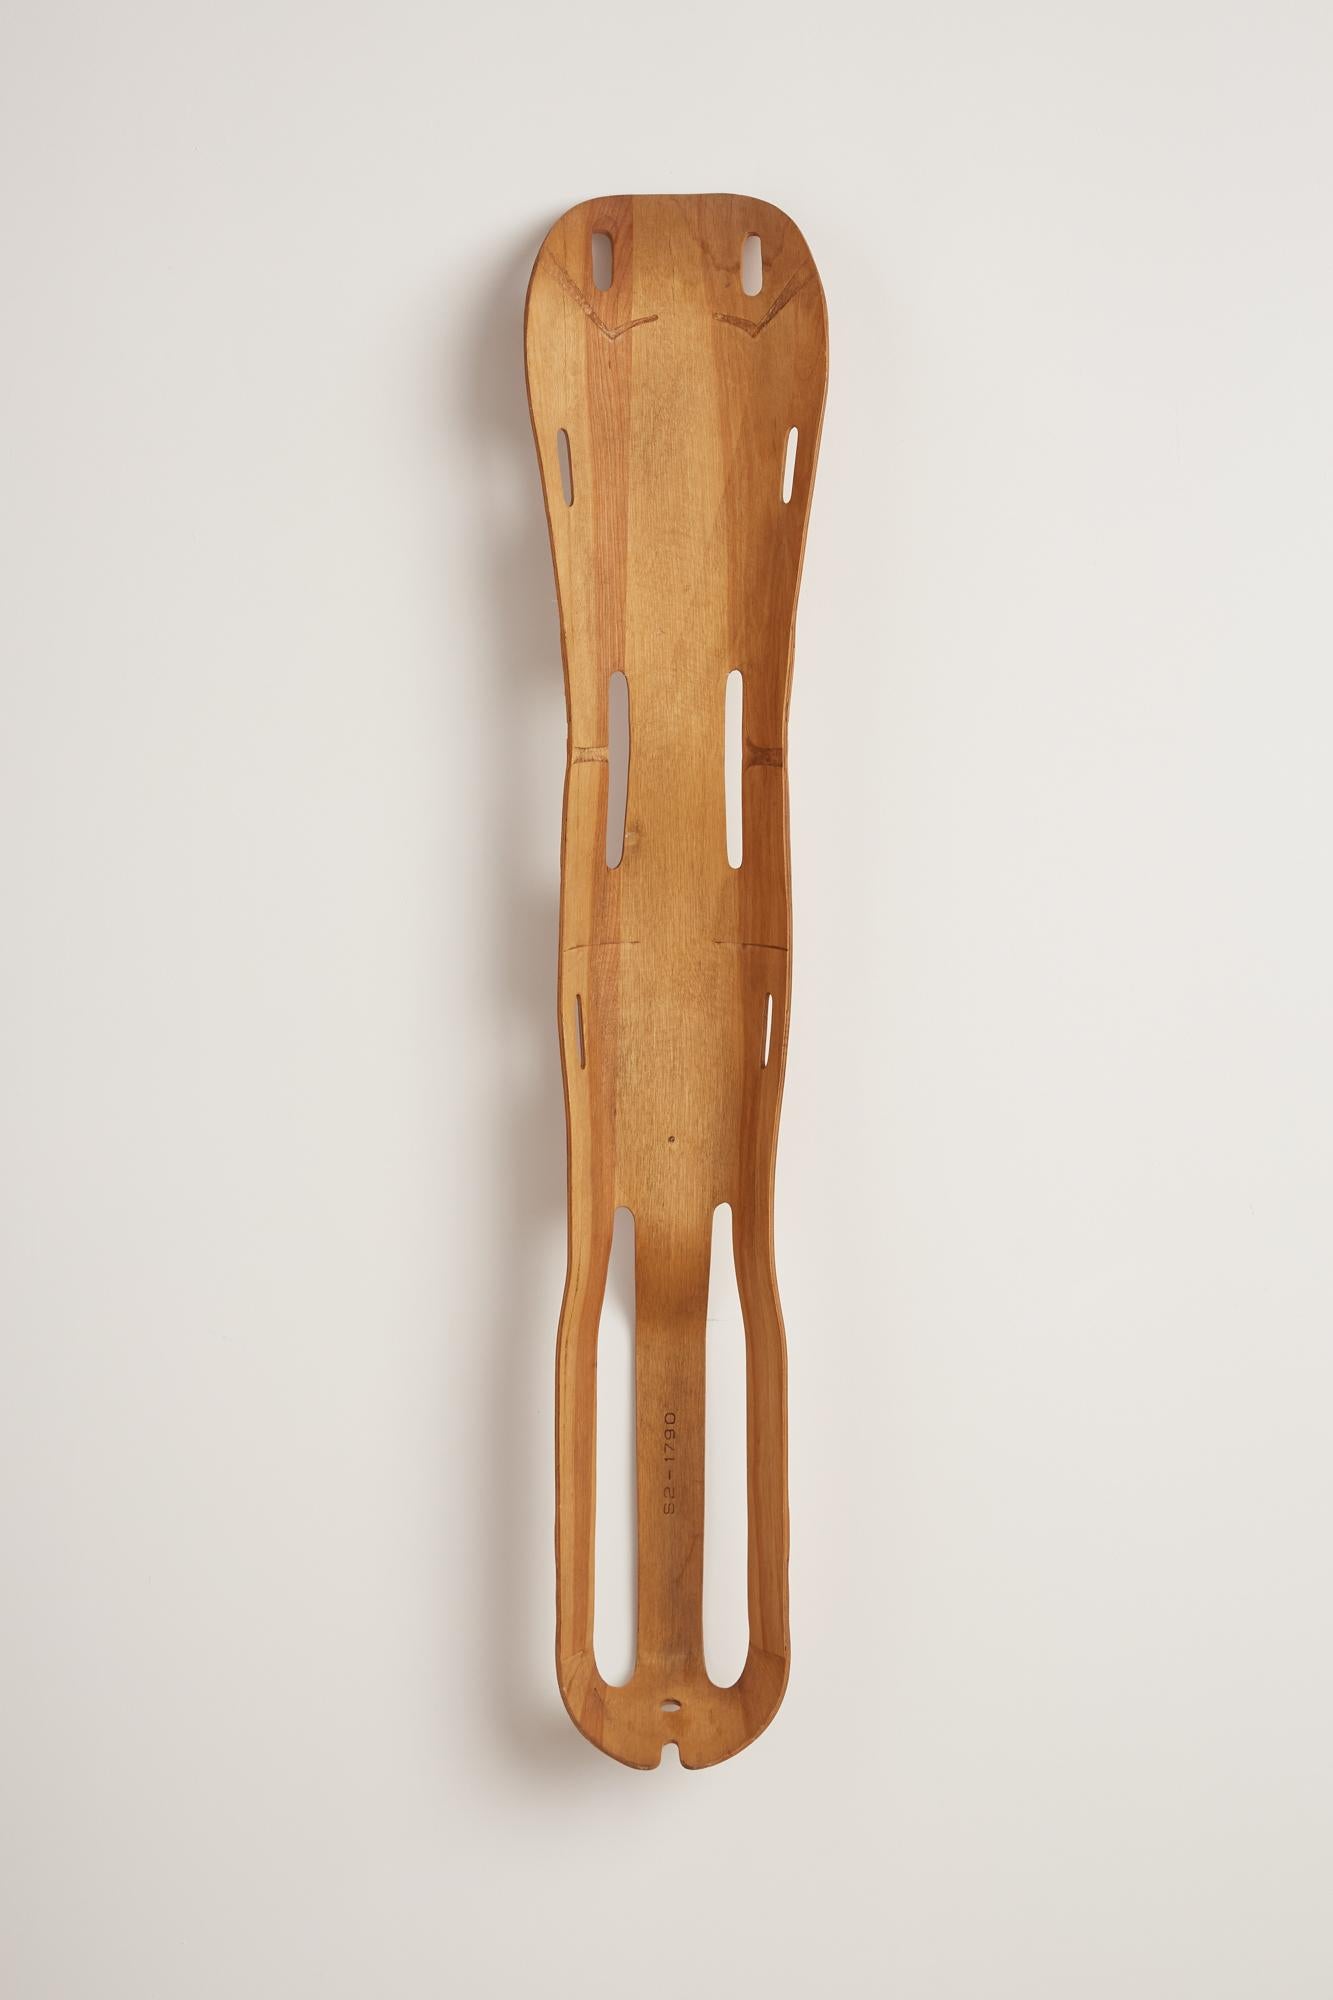 Molded plywood leg splint designed by Charles and Ray Eames for Evans Products c. 1940s. This piece was commissioned by the Navy during World War II for injured soldiers. This sculptural yet functional device helped to perfect the molded plywood